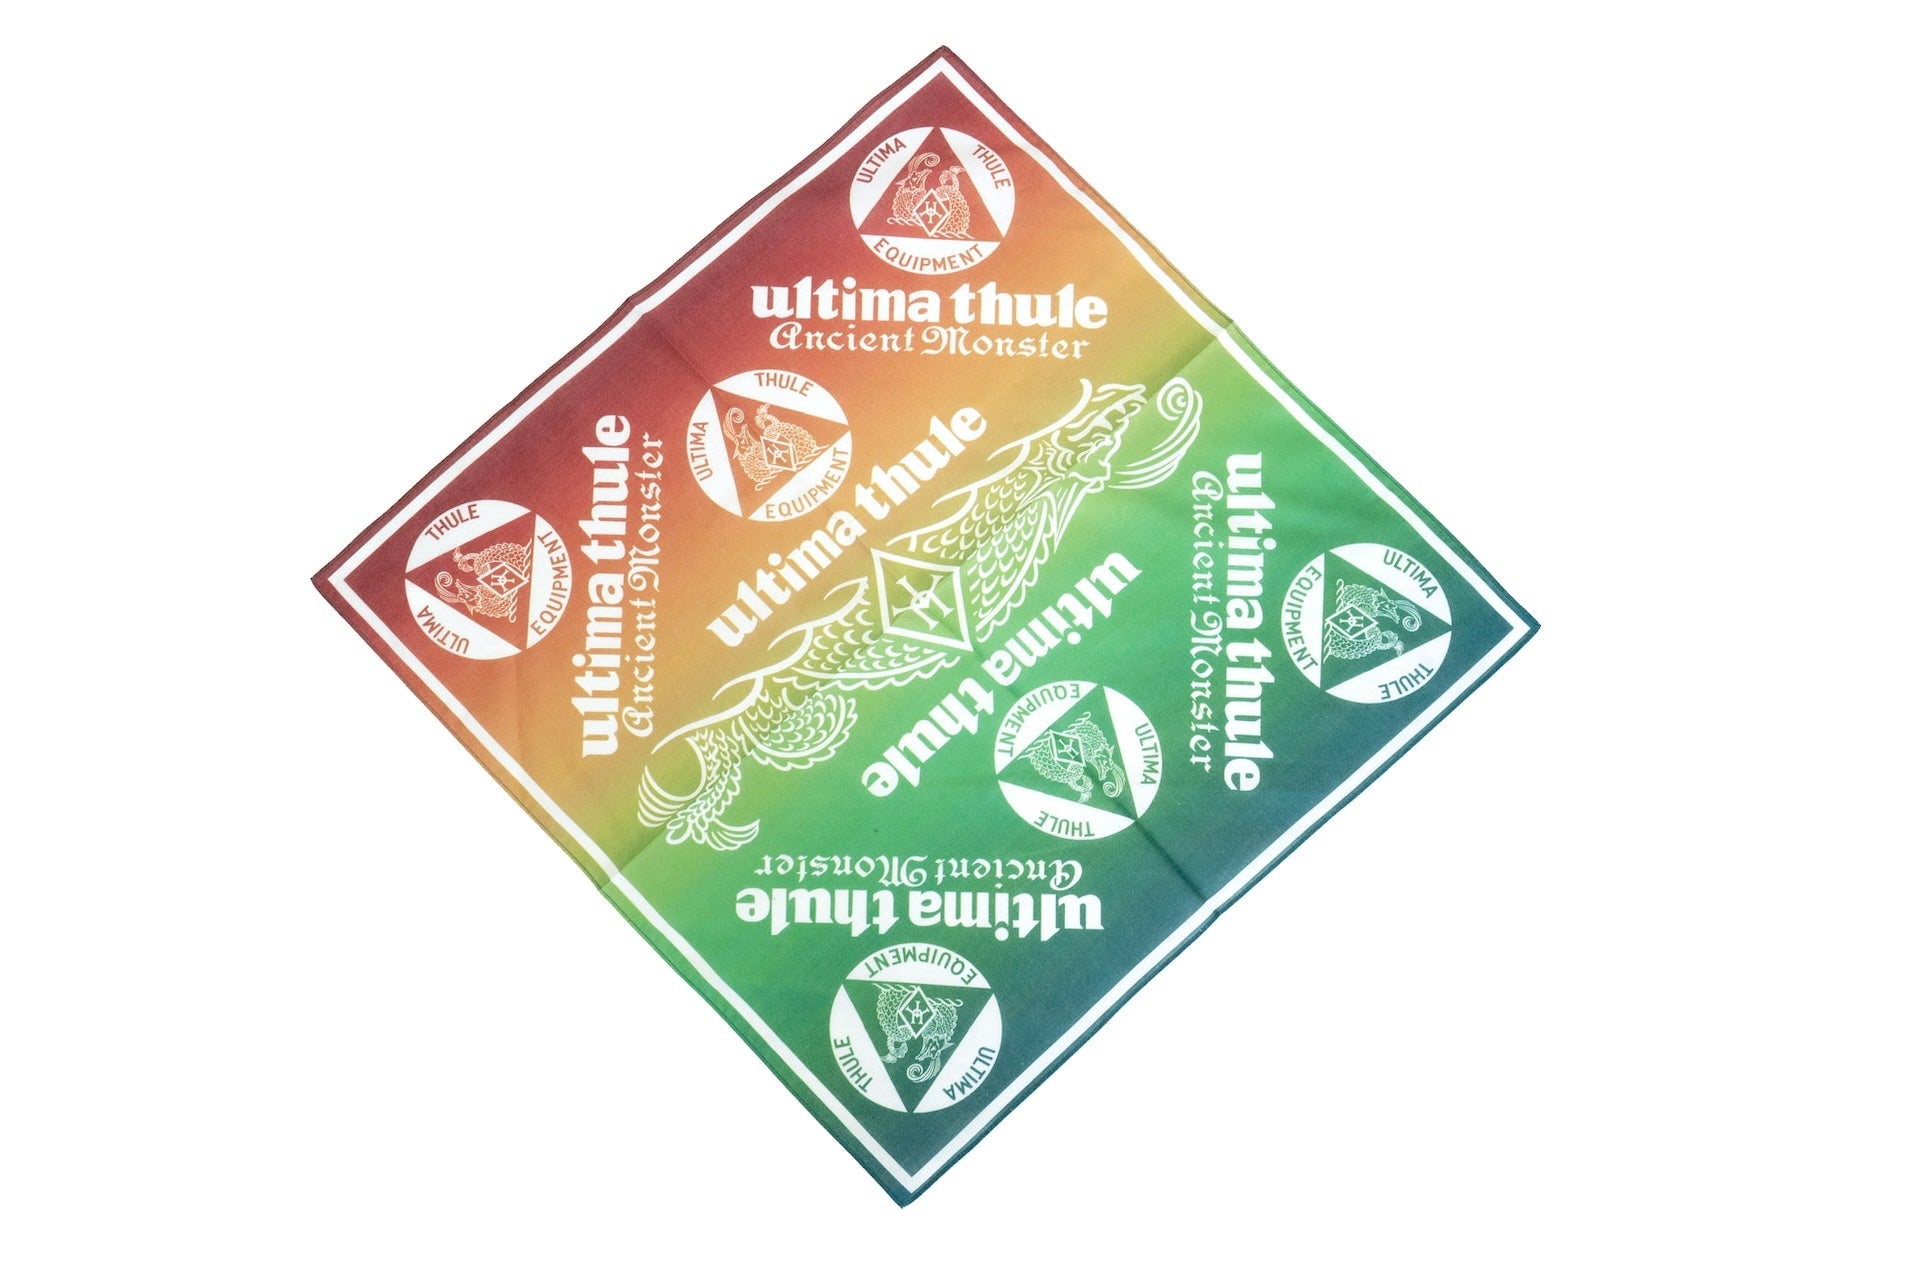 Ultima Thule by Freewheelers "Ancient Monster" Bandana (Multi-color Gradient X White)